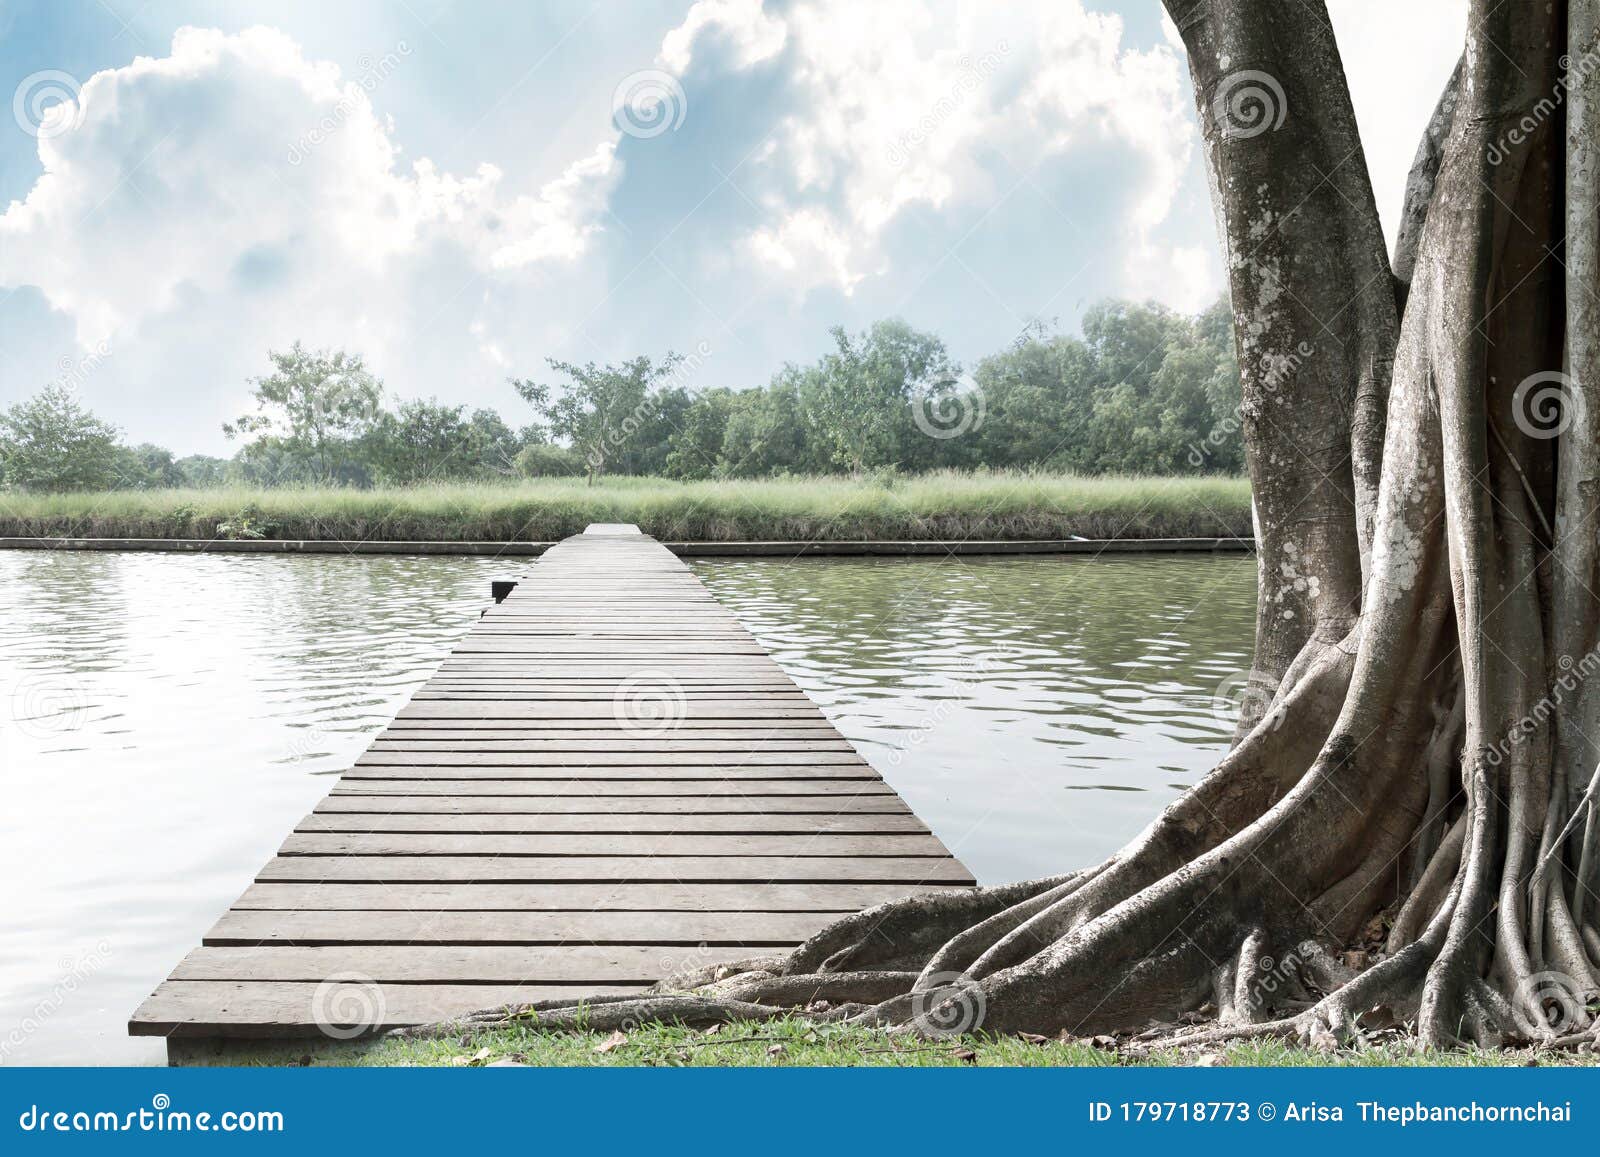 Wood Bridge on the River and Big Tree with Trunk and Roots Spreading Out  Beautiful on Grass Green in Nature Forest Background with Stock Image -  Image of construction, port: 179718773